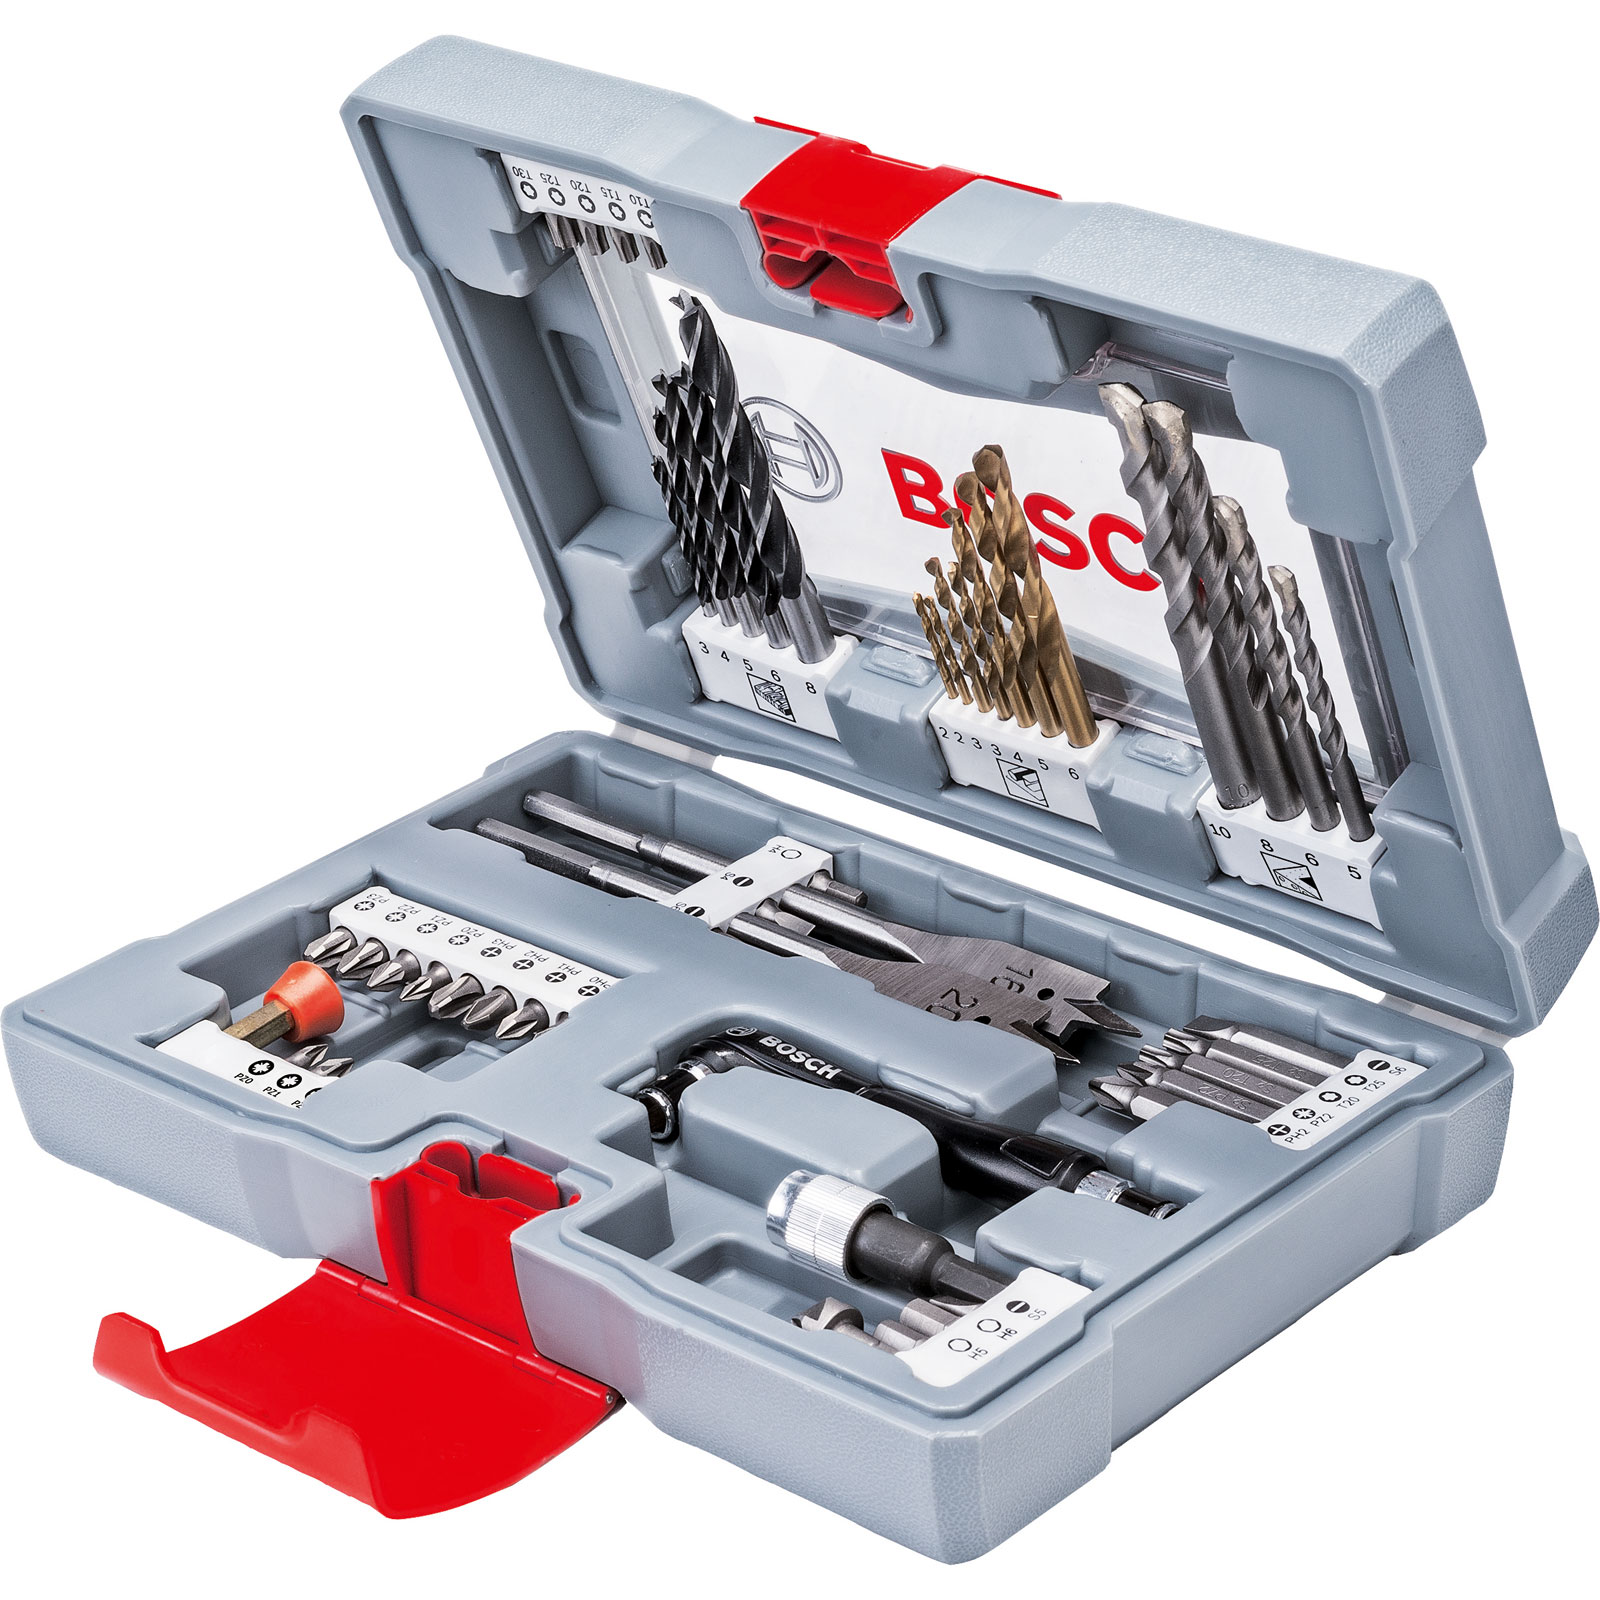 Image of Bosch 49 Piece Premium Power Tool Accessory Drill and Screwdriver Bit Set